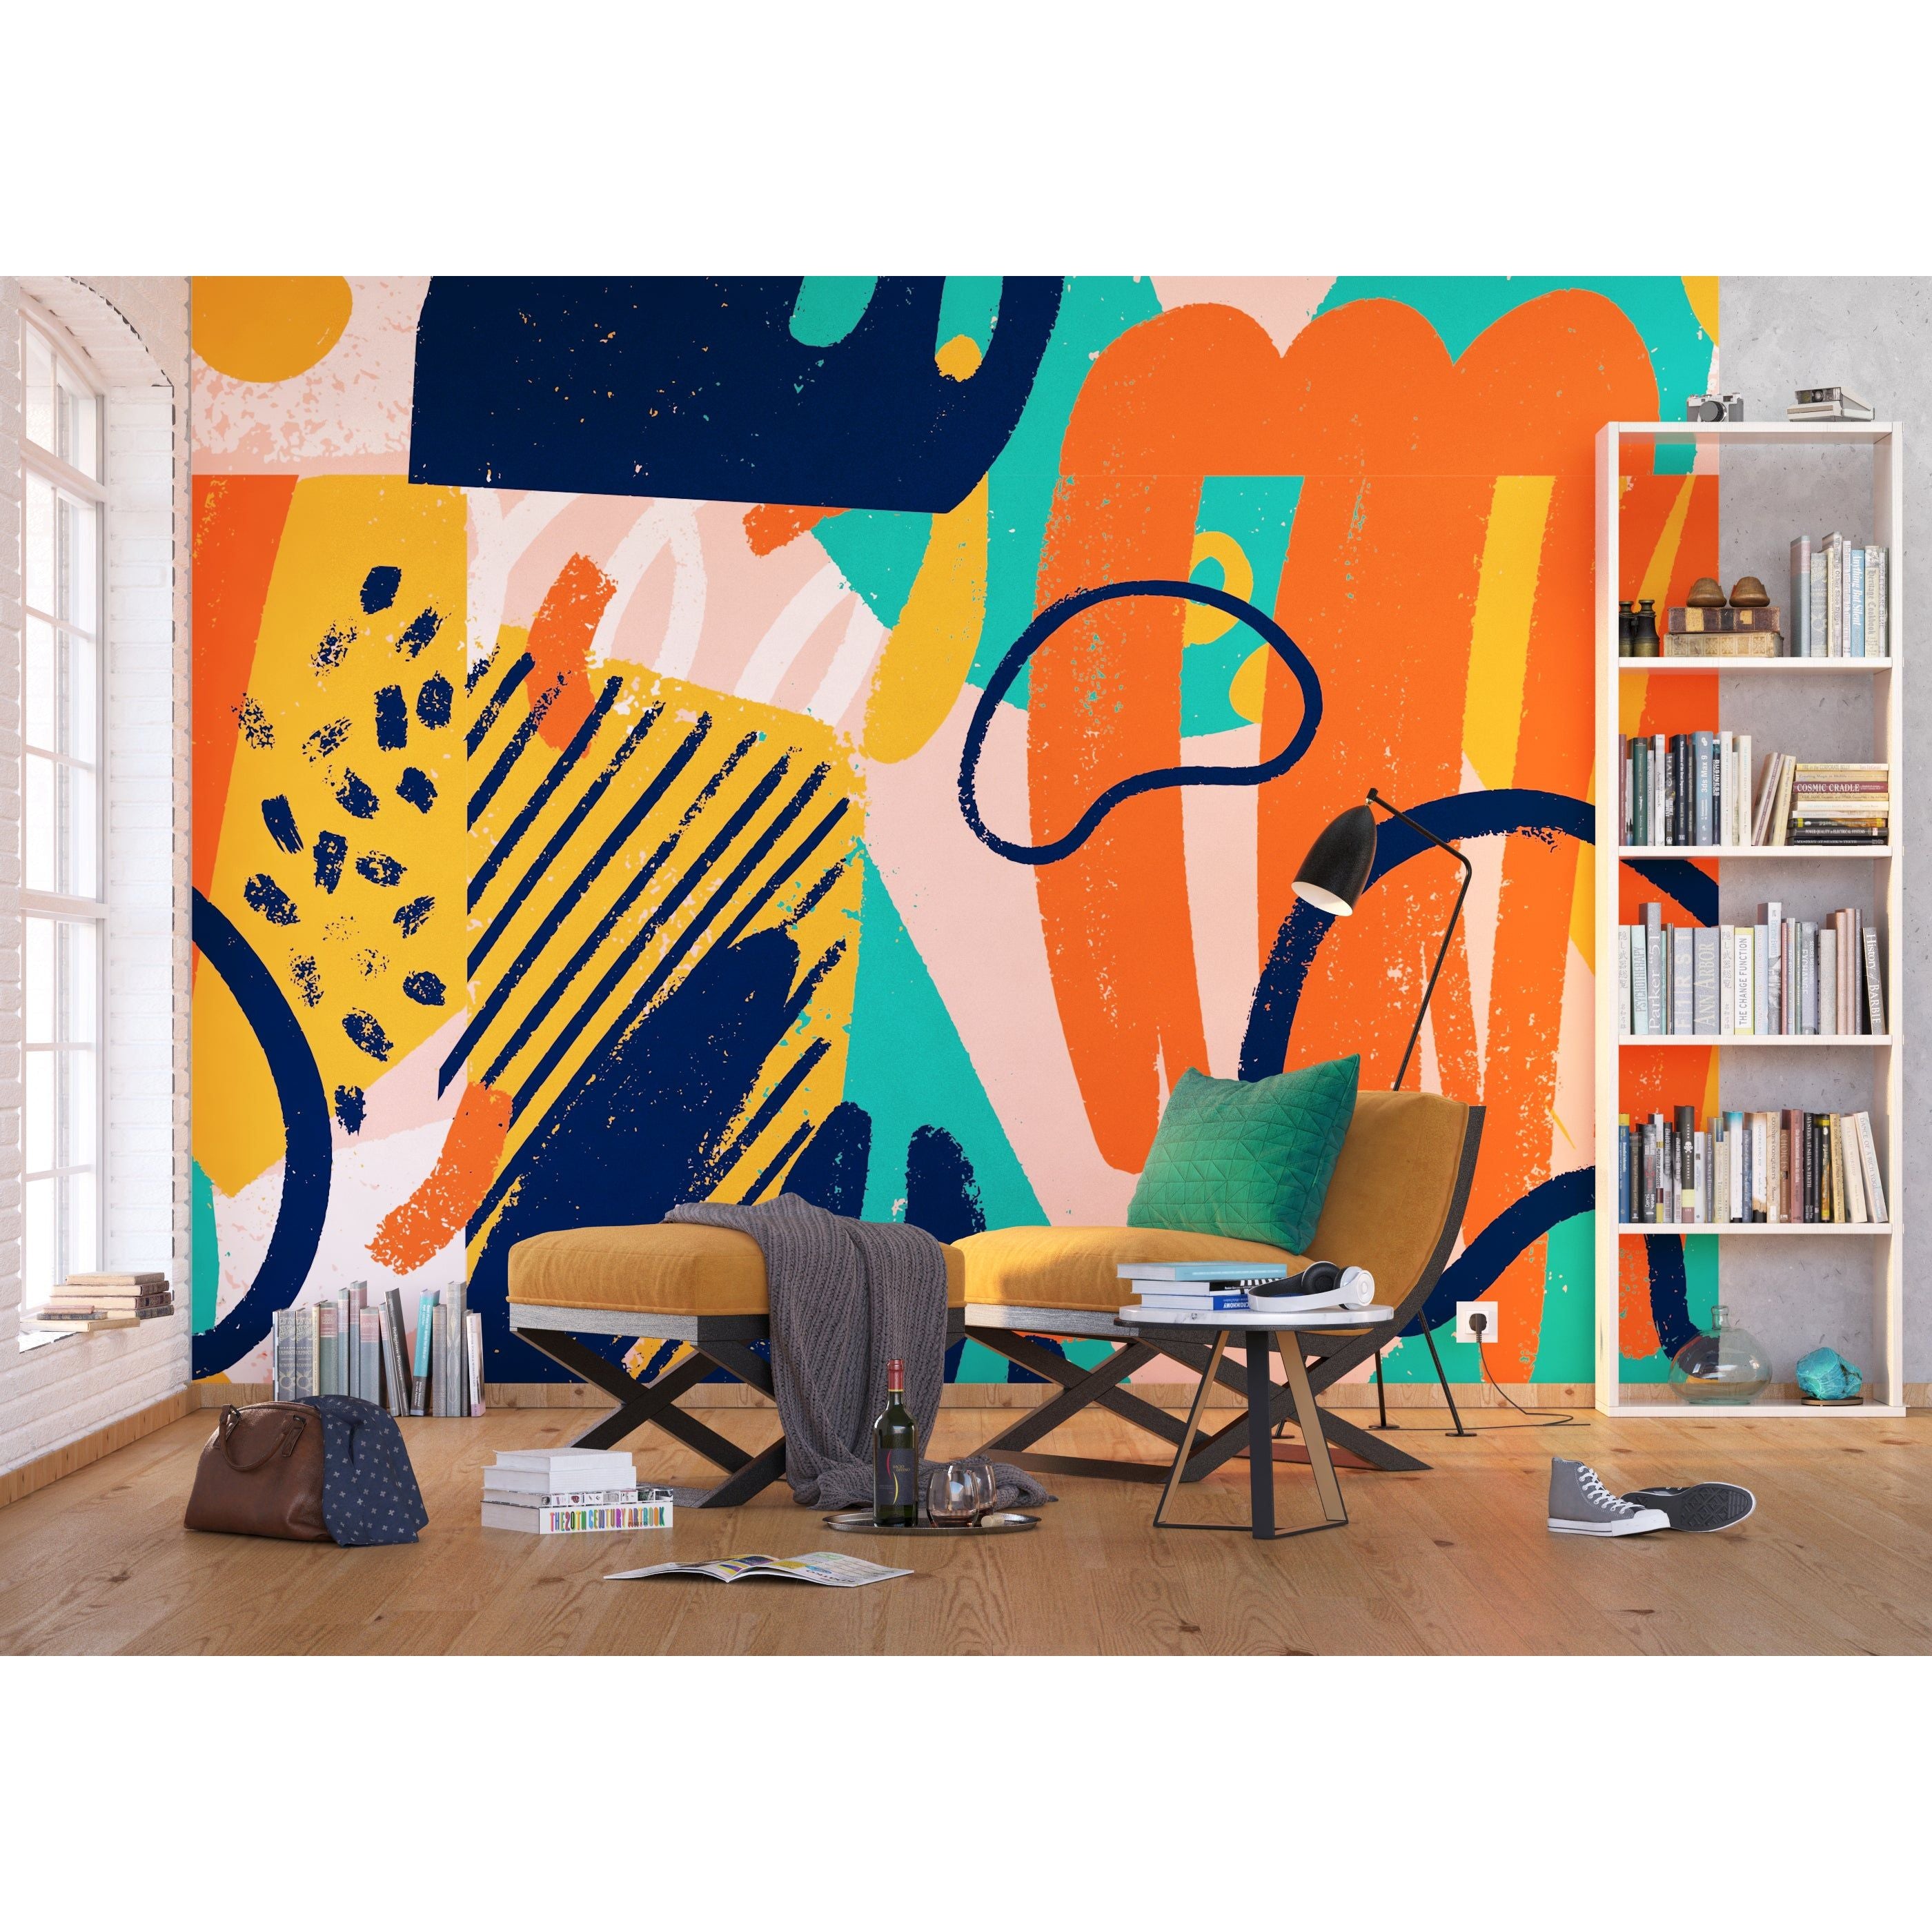 Vibrant Brushstrokes: Colorful Shapes Wall Mural